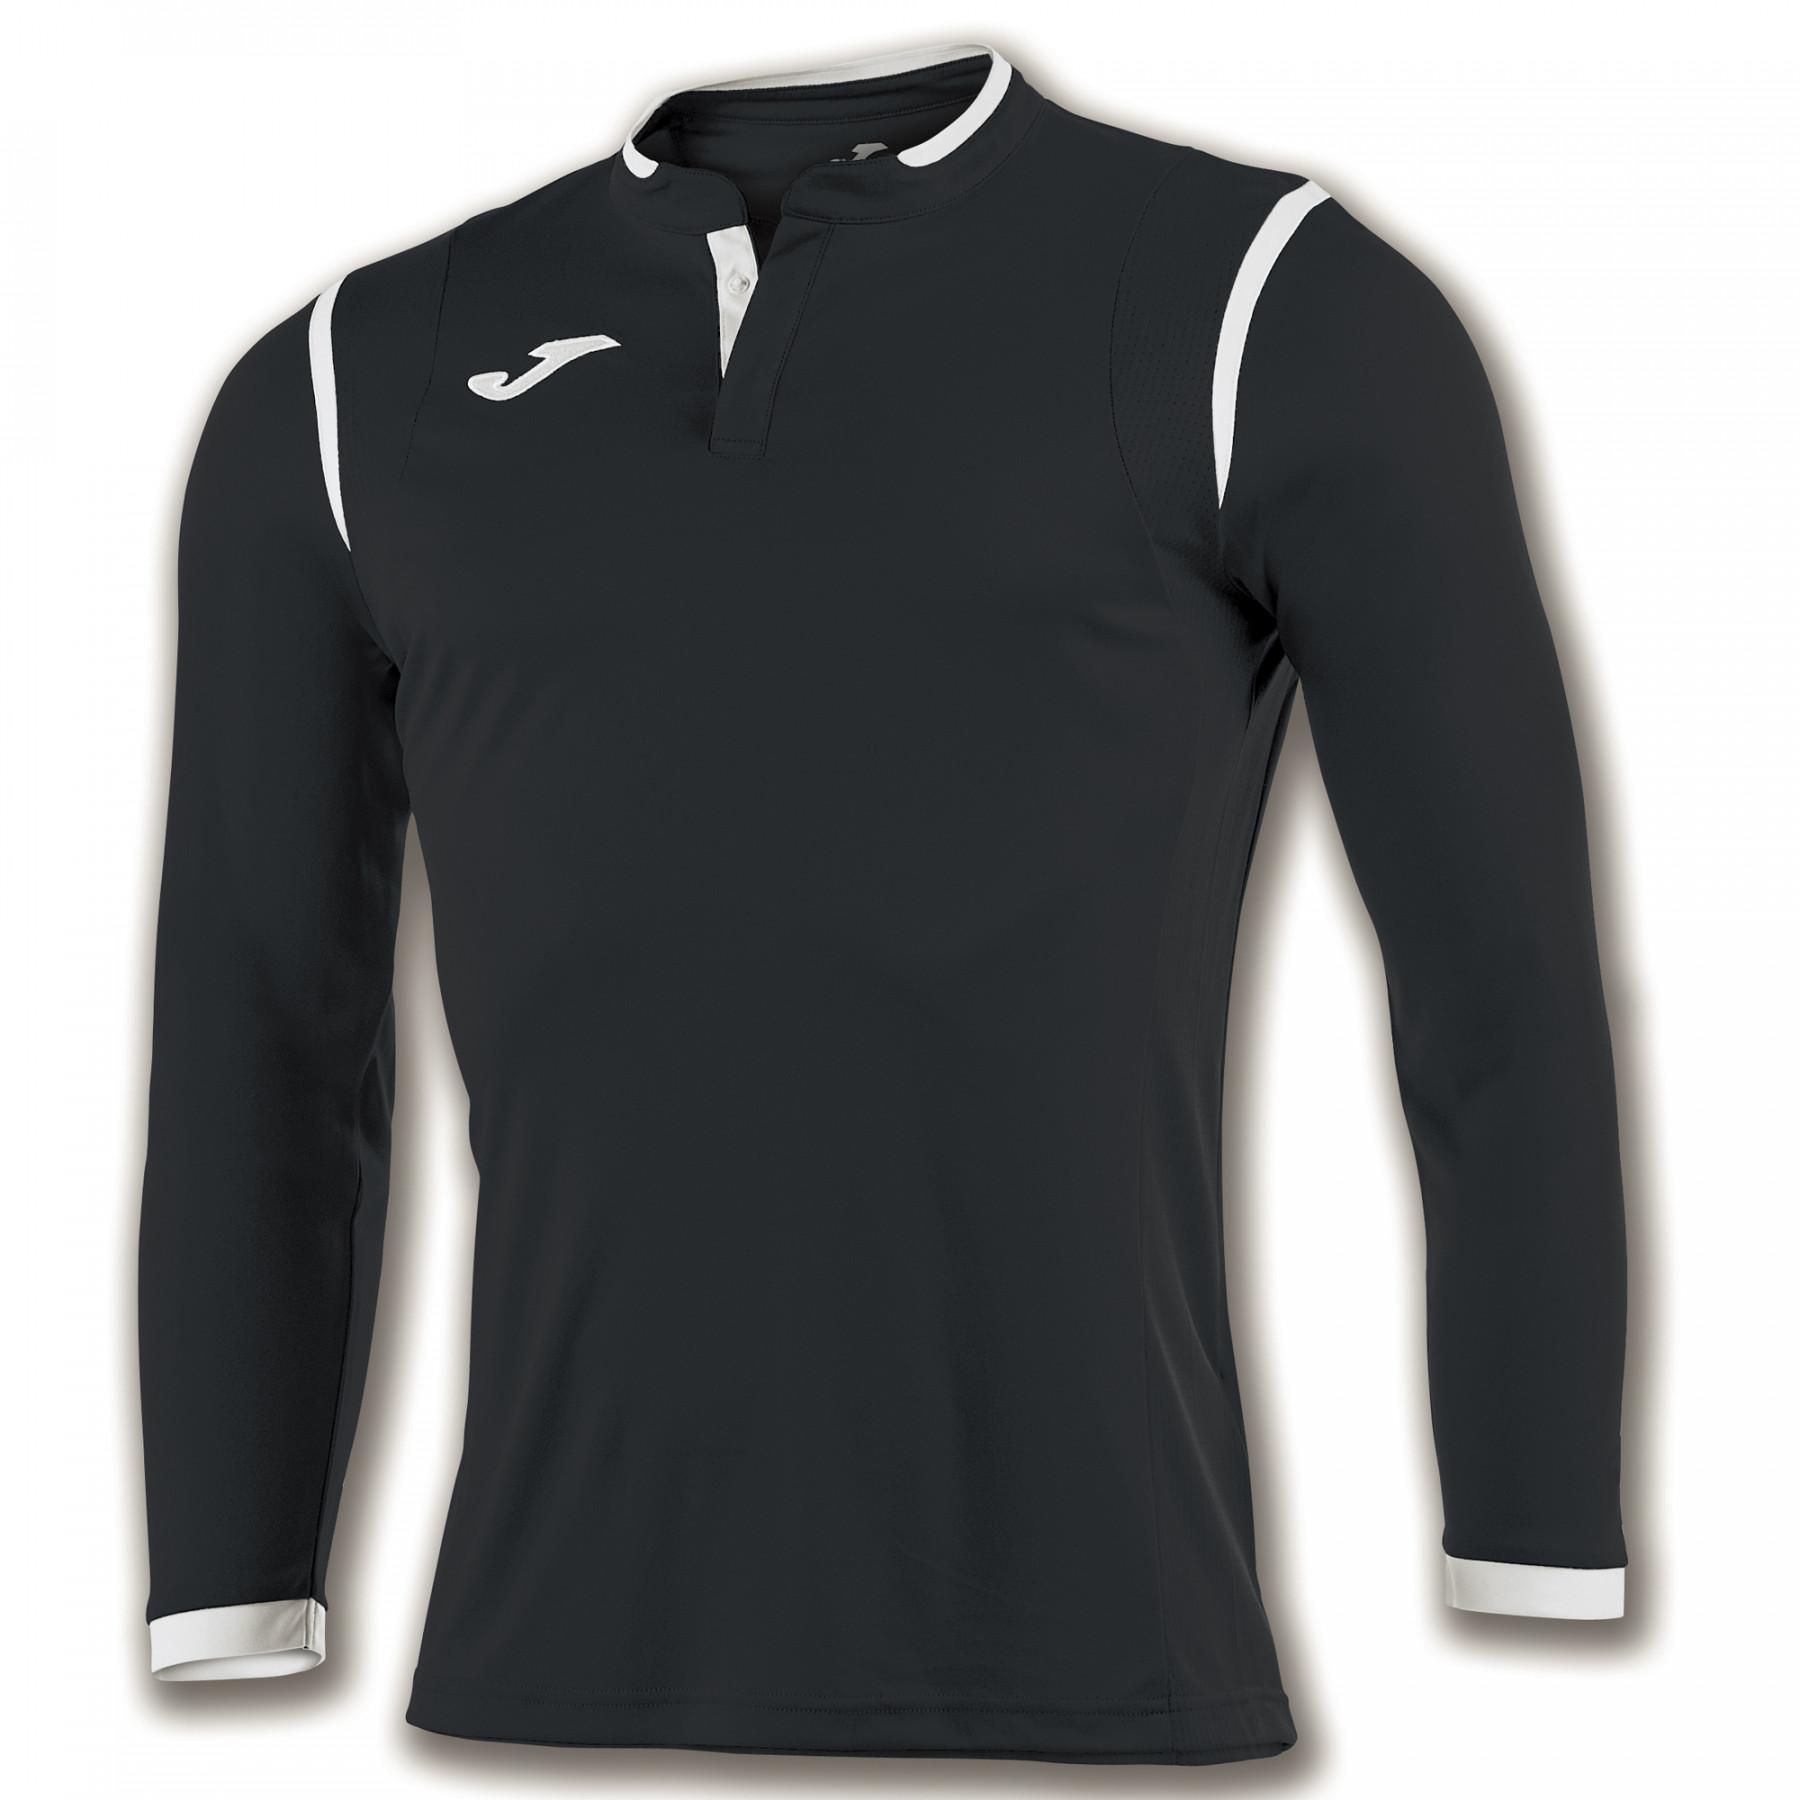 Maillot manches longues Joma Toletum